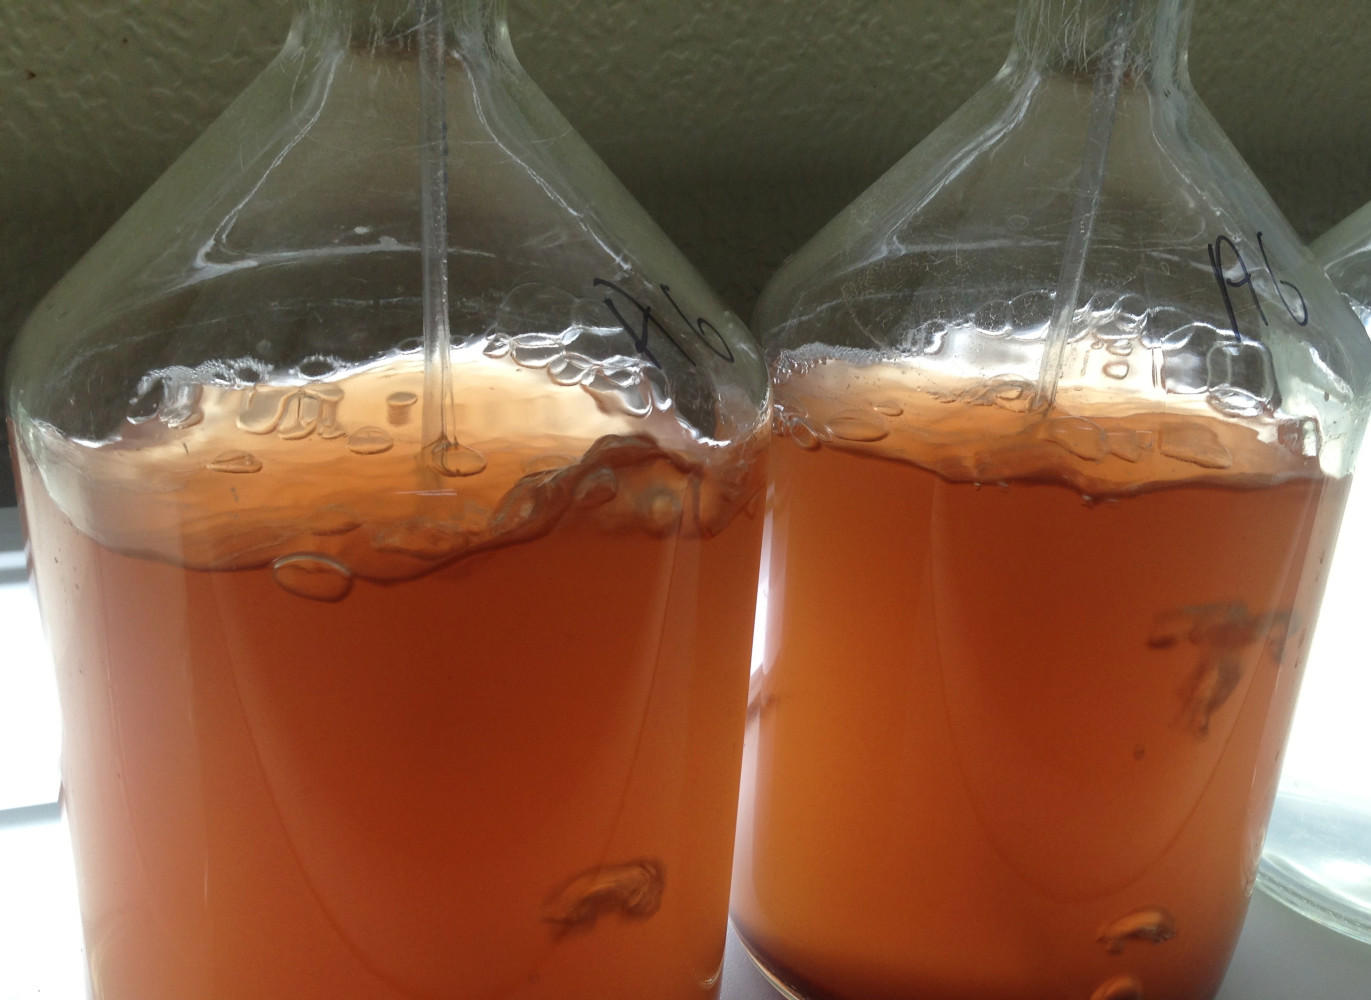 ONLY A TWO  LITER CULTURE IS REQUIRED FOR INNOCULATION

(Rhodomonas above)